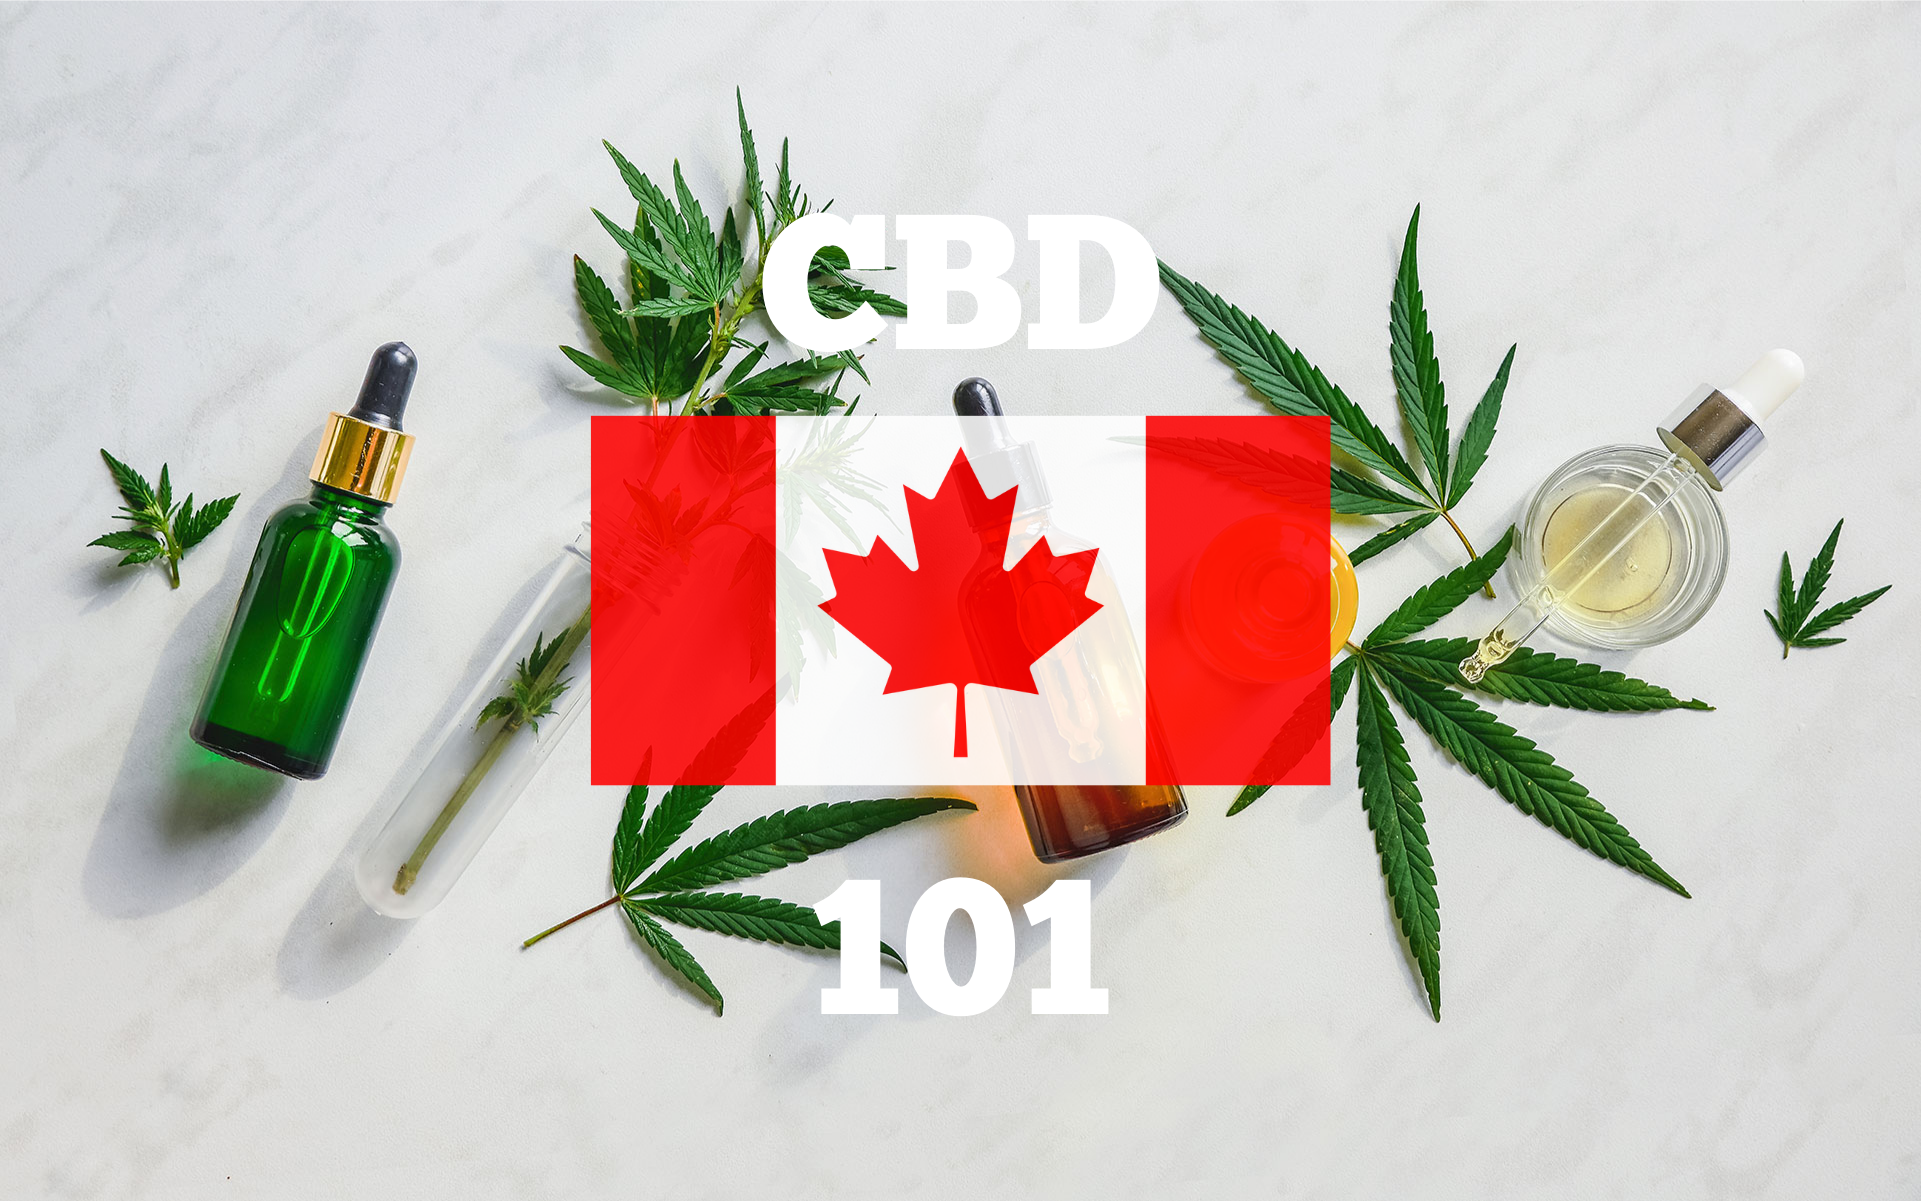 visualizes the subject of contents for those interested in cbd oil in canada